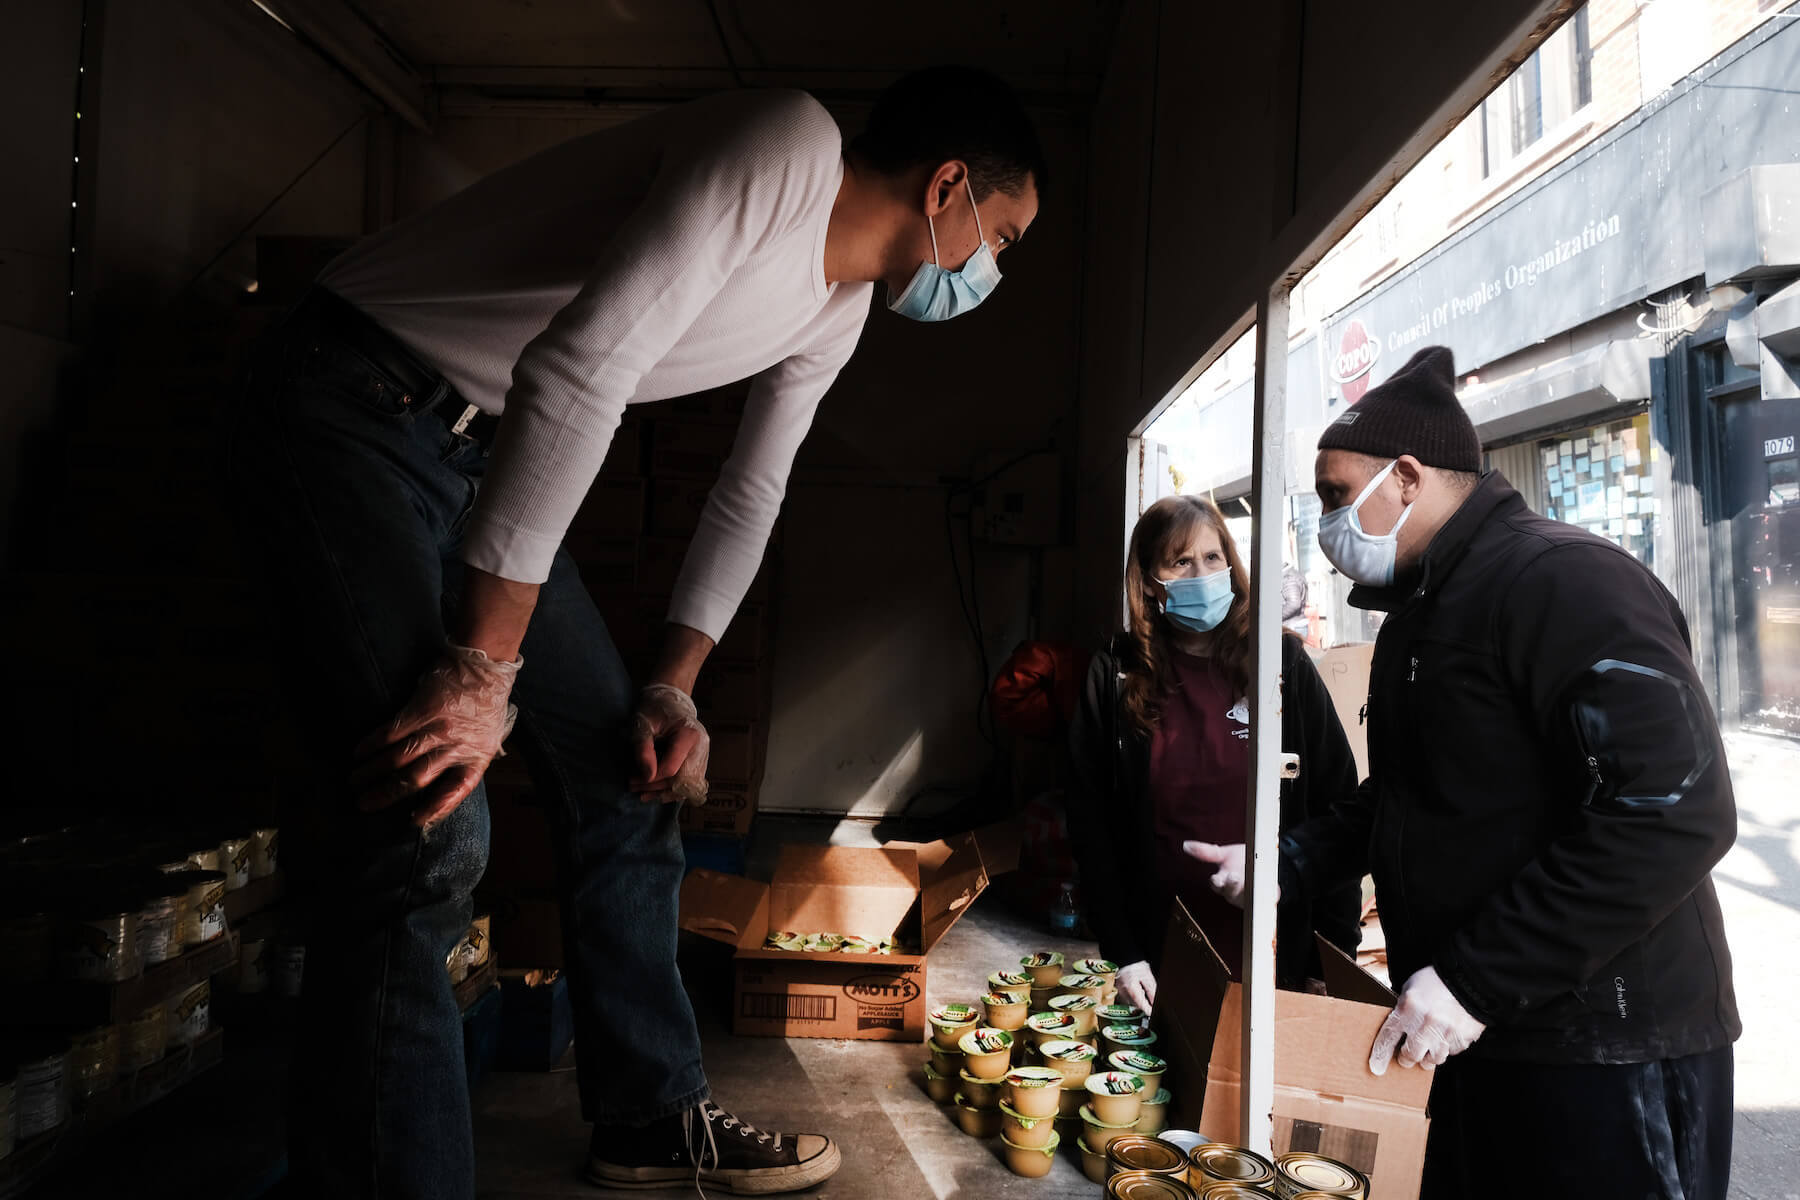 Food is distributed to hundreds outside of a Brooklyn mosque and cultural center on December 11, 2020 in New York City.